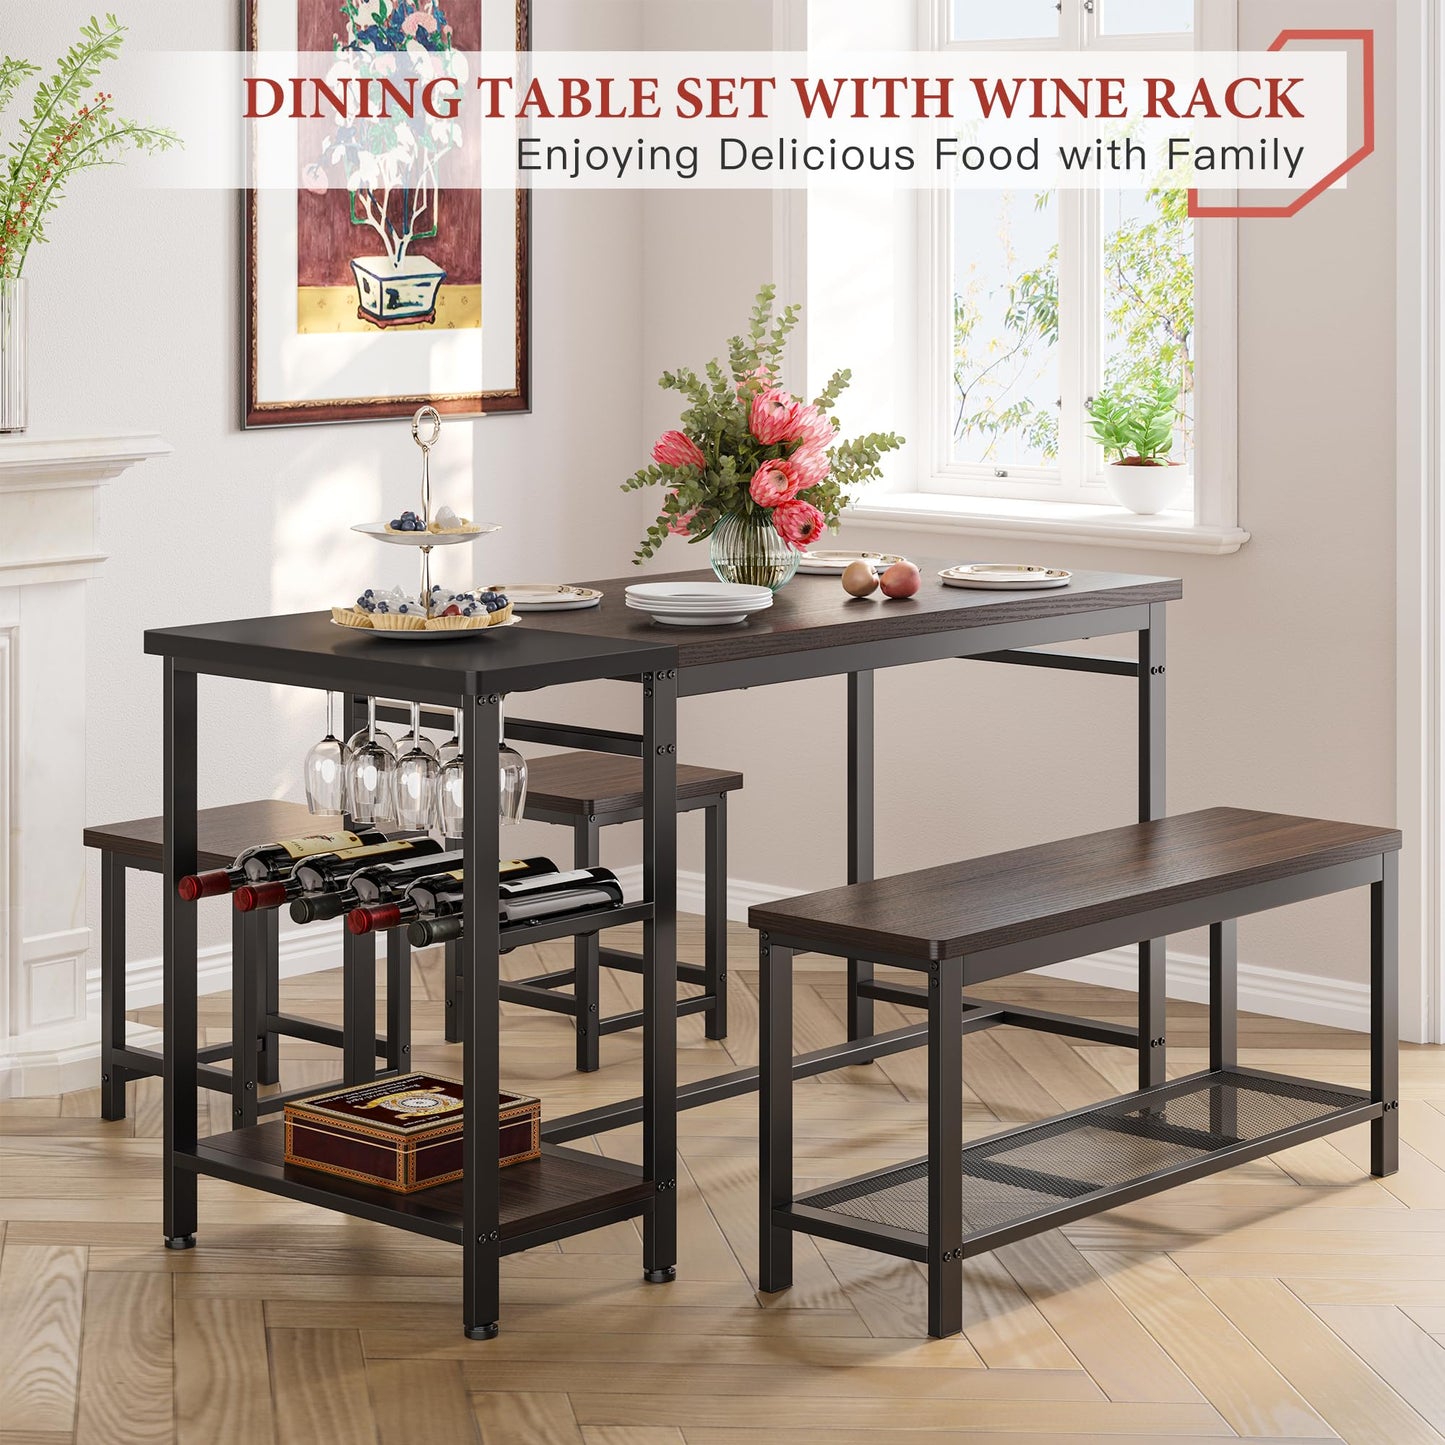 Hana Exports Dining Table Set for 4, Kitchen Table Set 4 Piece Dining Room Table Set with Wine Rack and Storage Shelf, Space-Saving Dinette Set for Small Space,Breakfast Nook, Espresso Brown